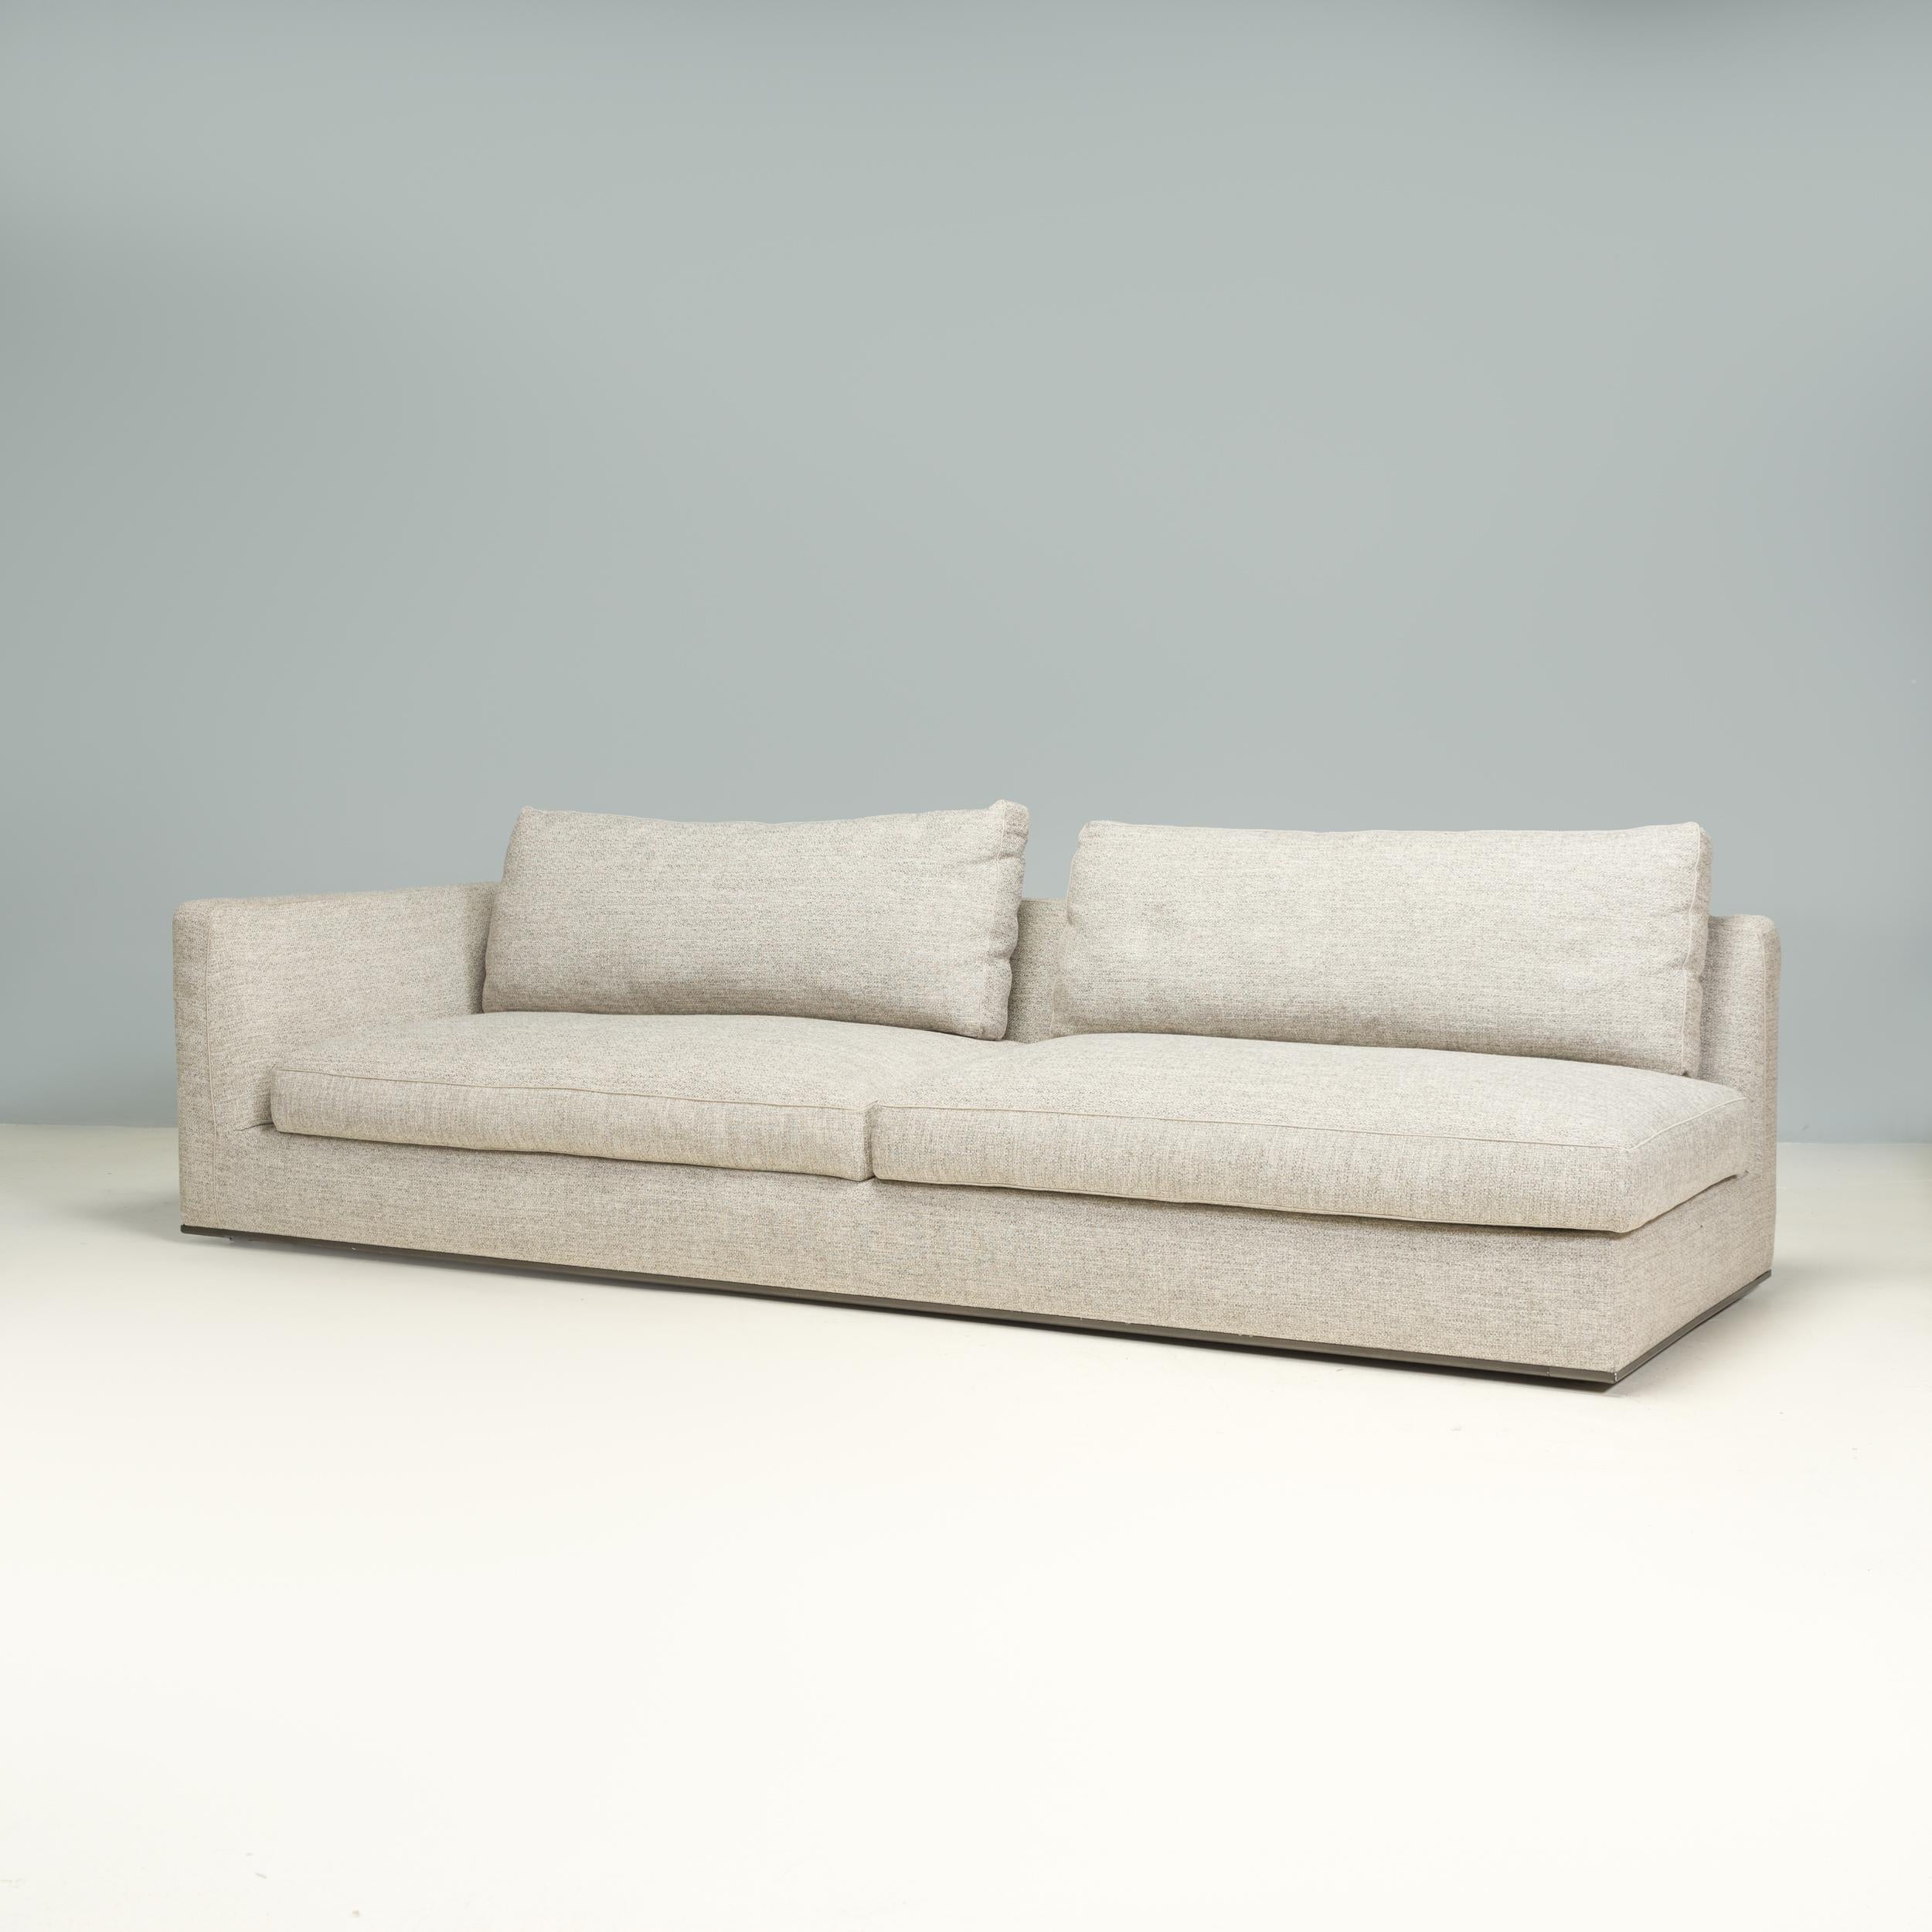 Originally designed by Antonio Citterio for B&B Italia in 2016, the Richard sofa is a fantastic example of contemporary Italian design.

The two seat sofa is constructed from a tubular steel frame, with a slimline tuxedo style silhouette and a